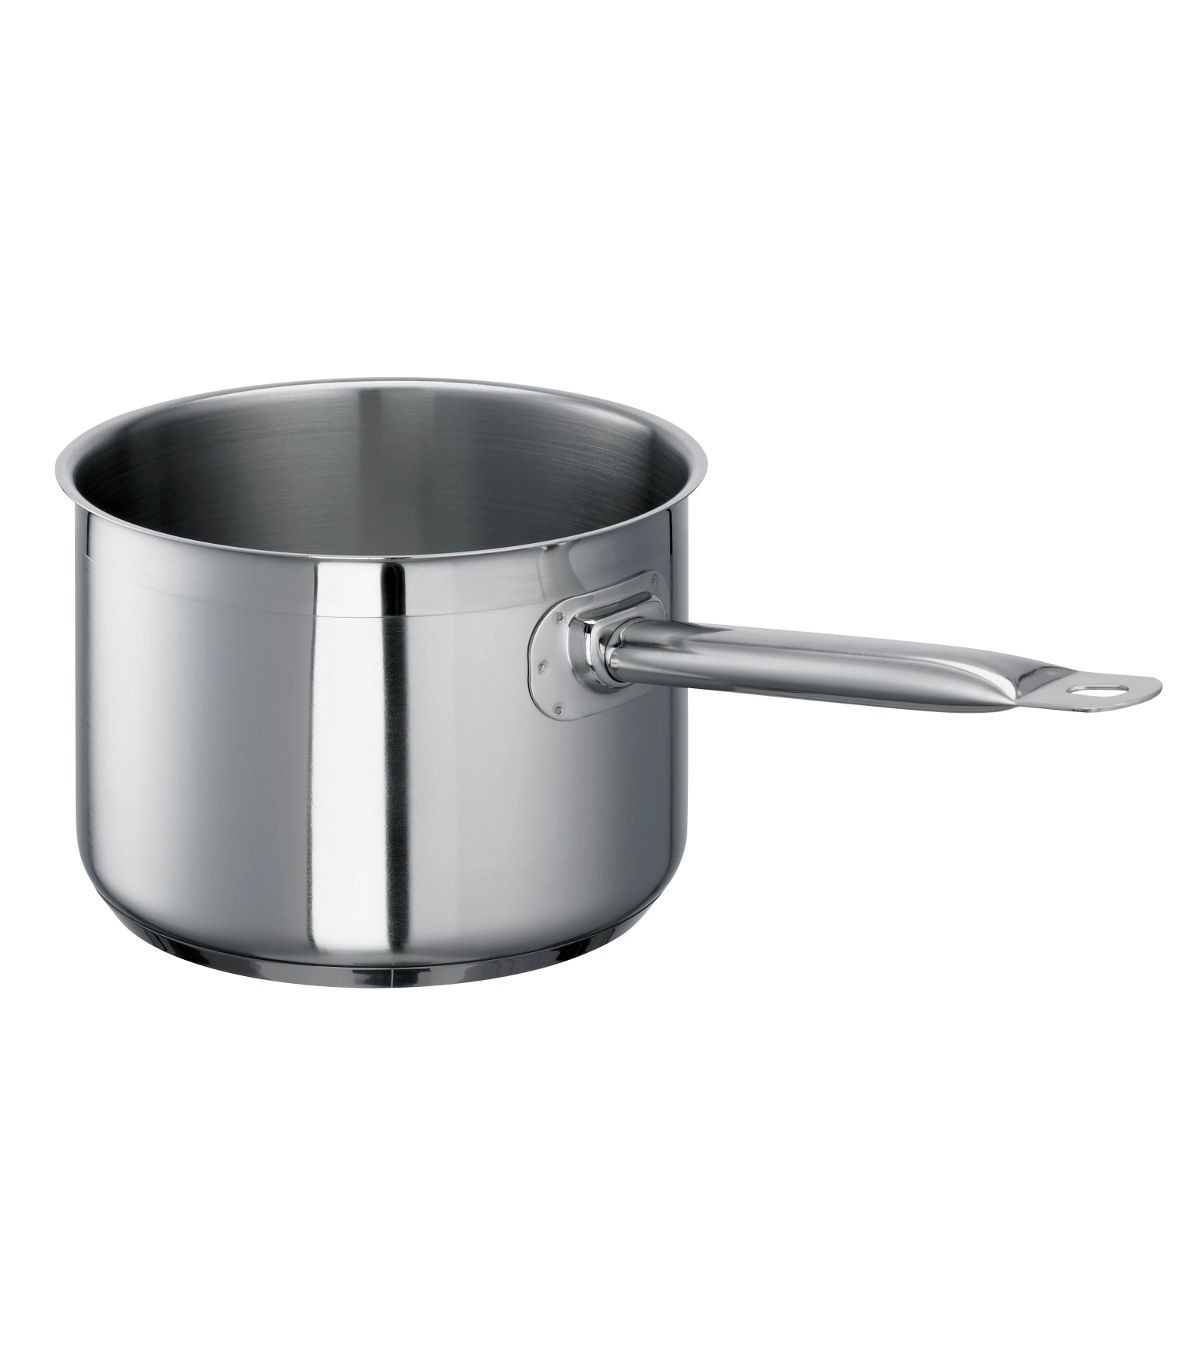 Cooking Pot 20-cm Ø Ceramic Coating Pot with Non-Stick Coating Suitable for All Types of stoves Induction Gas Electric Aluminum 2.0 l 